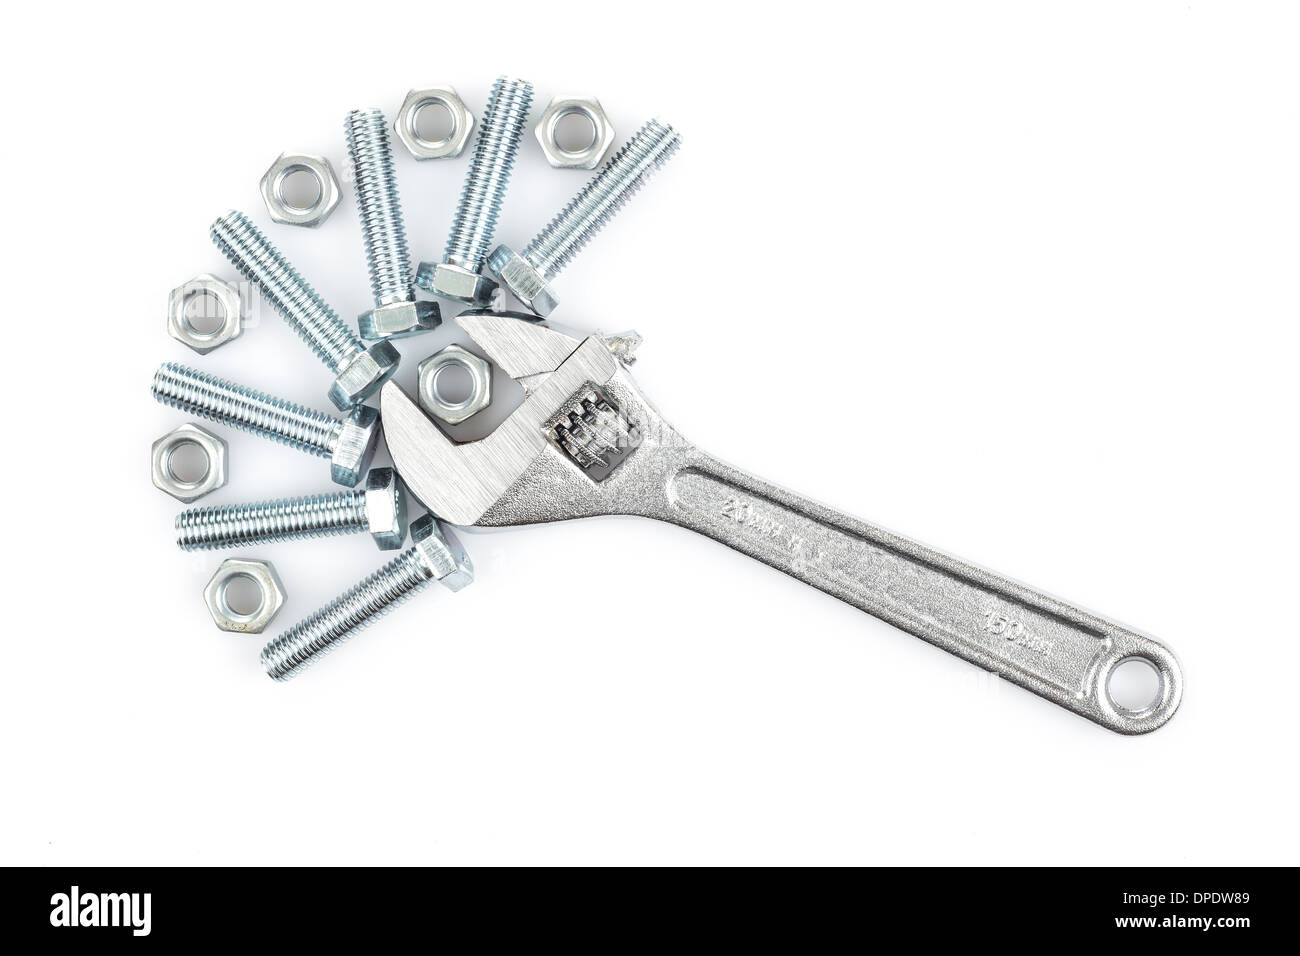 Adjustable wrench with screws and nuts on white background Stock Photo